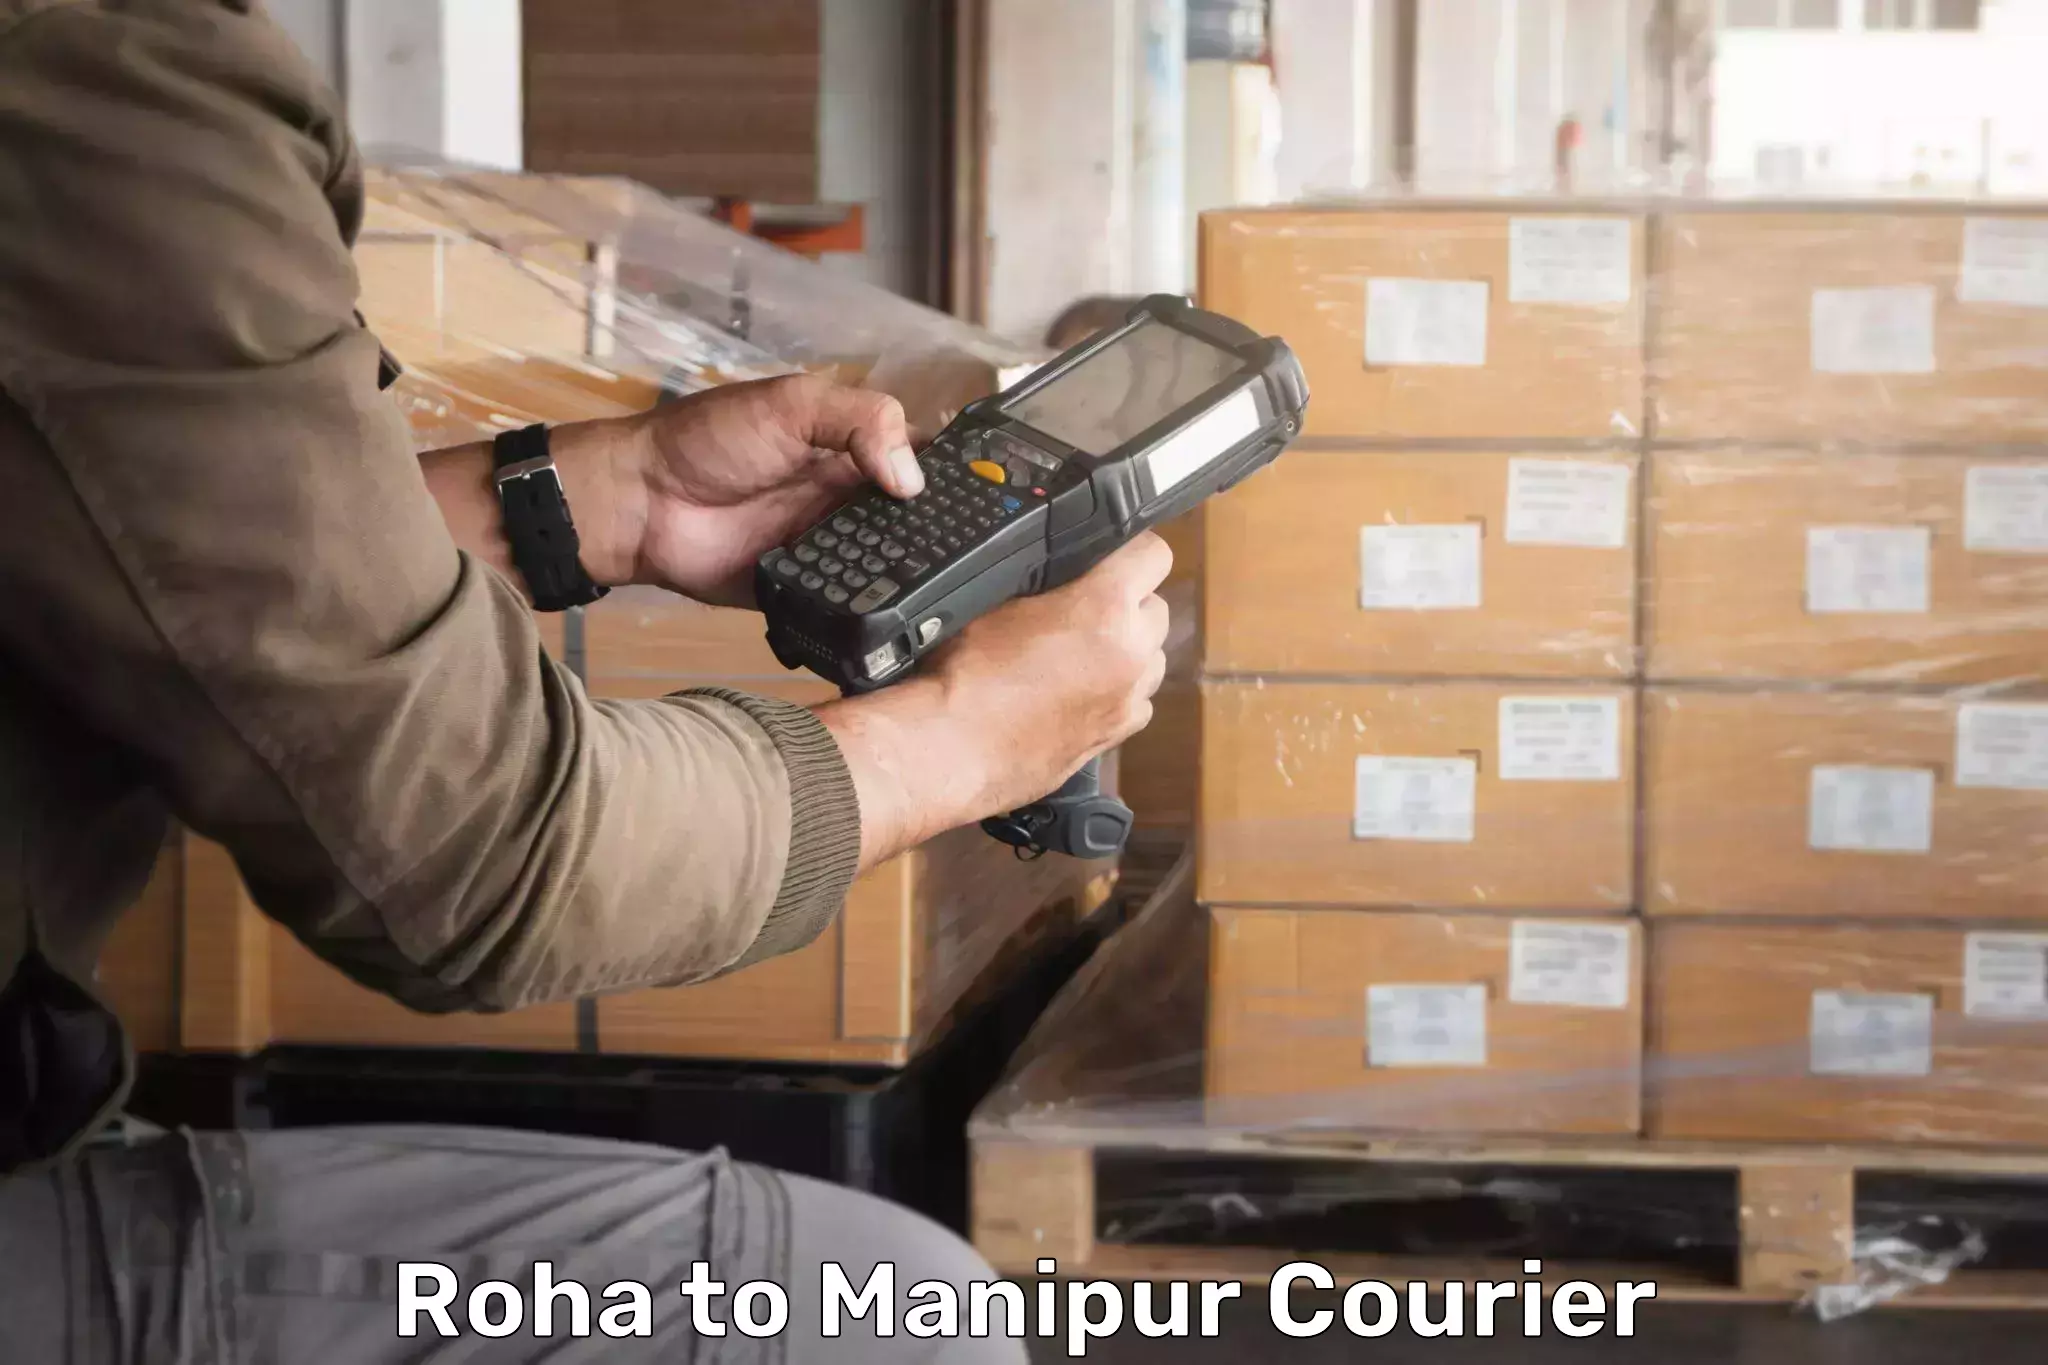 24/7 courier service Roha to Manipur